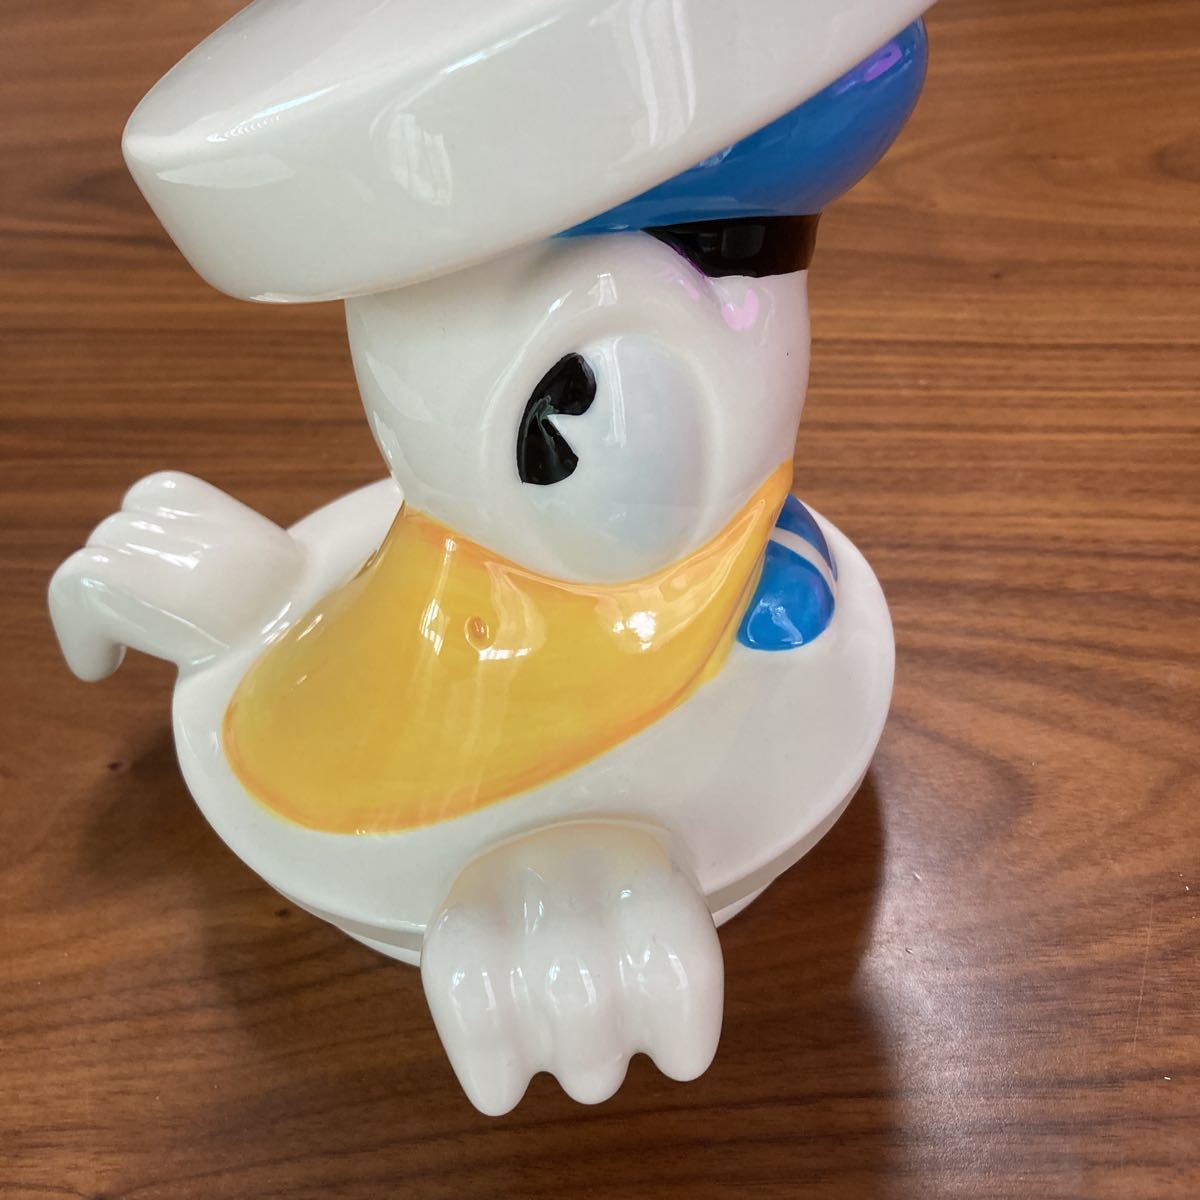  Disney used Donald Duck cookie ja- ceramics figure extra-large big size inserting thing ornament 